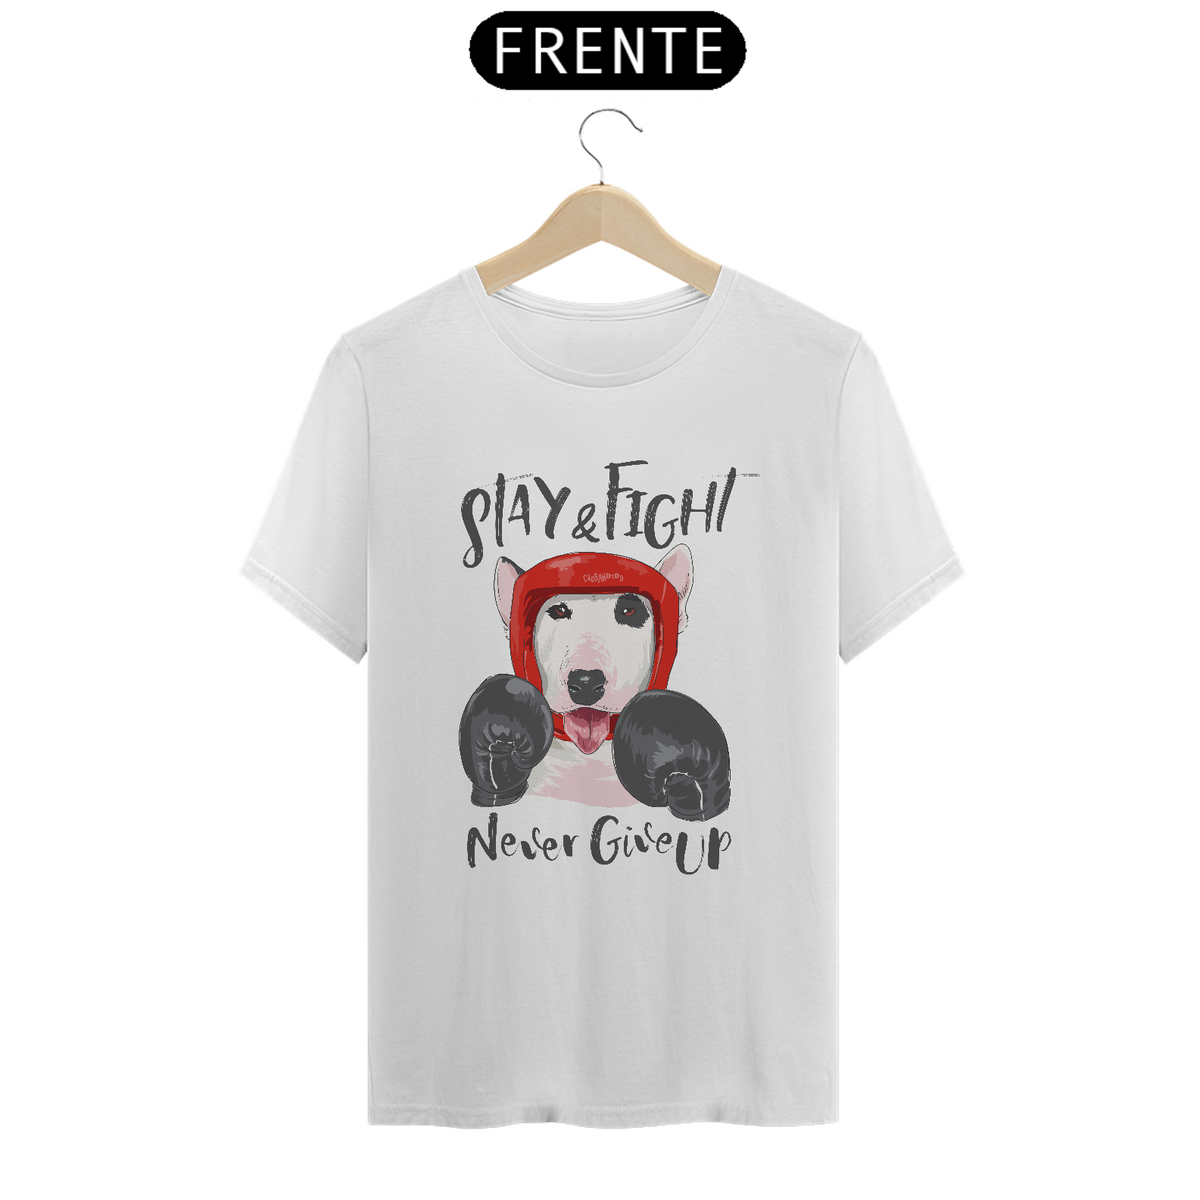 Nome do produto: Camiseta Stay and Fight - Never Give Up